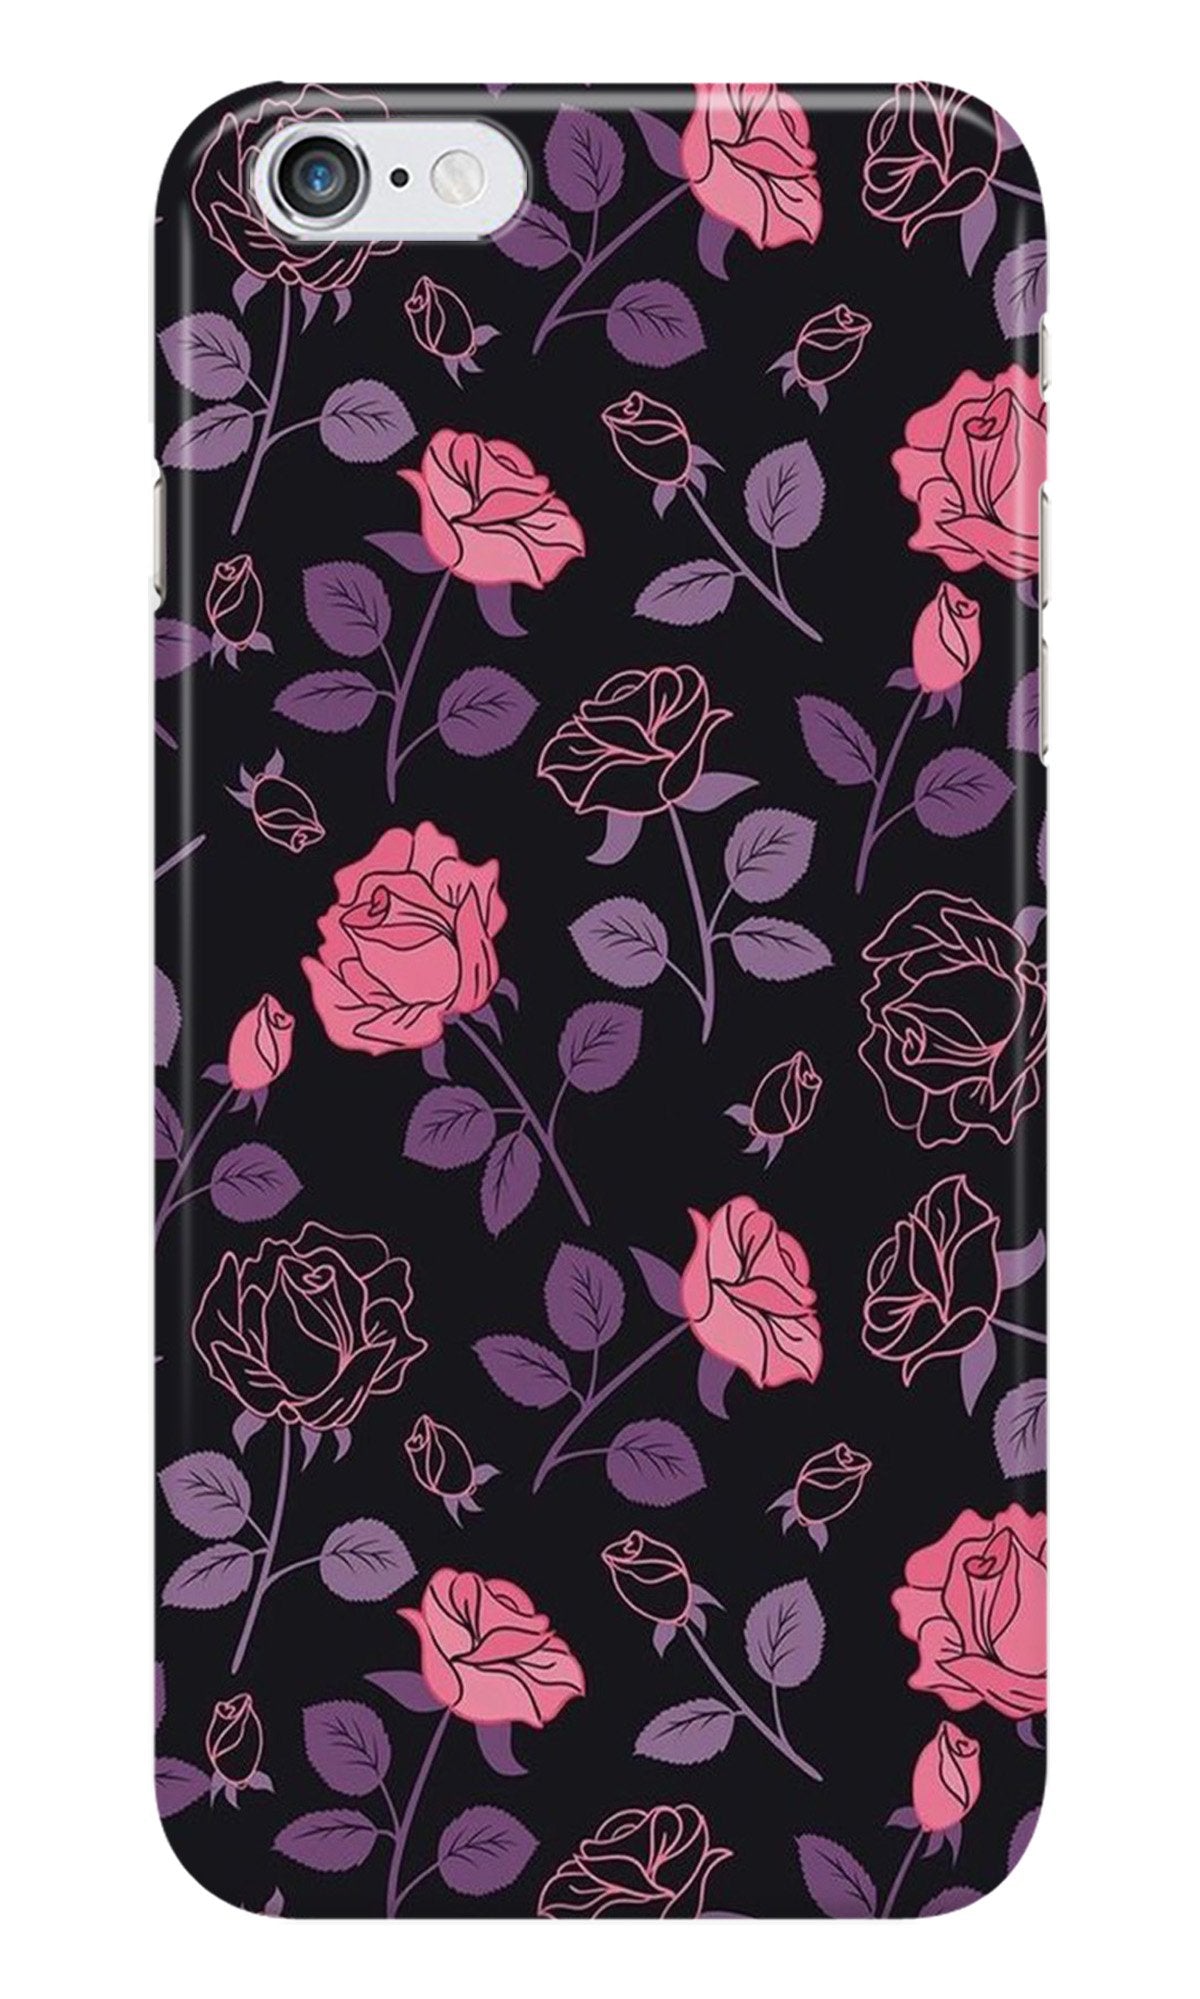 Rose Black Background Case for iPhone 6/ 6s